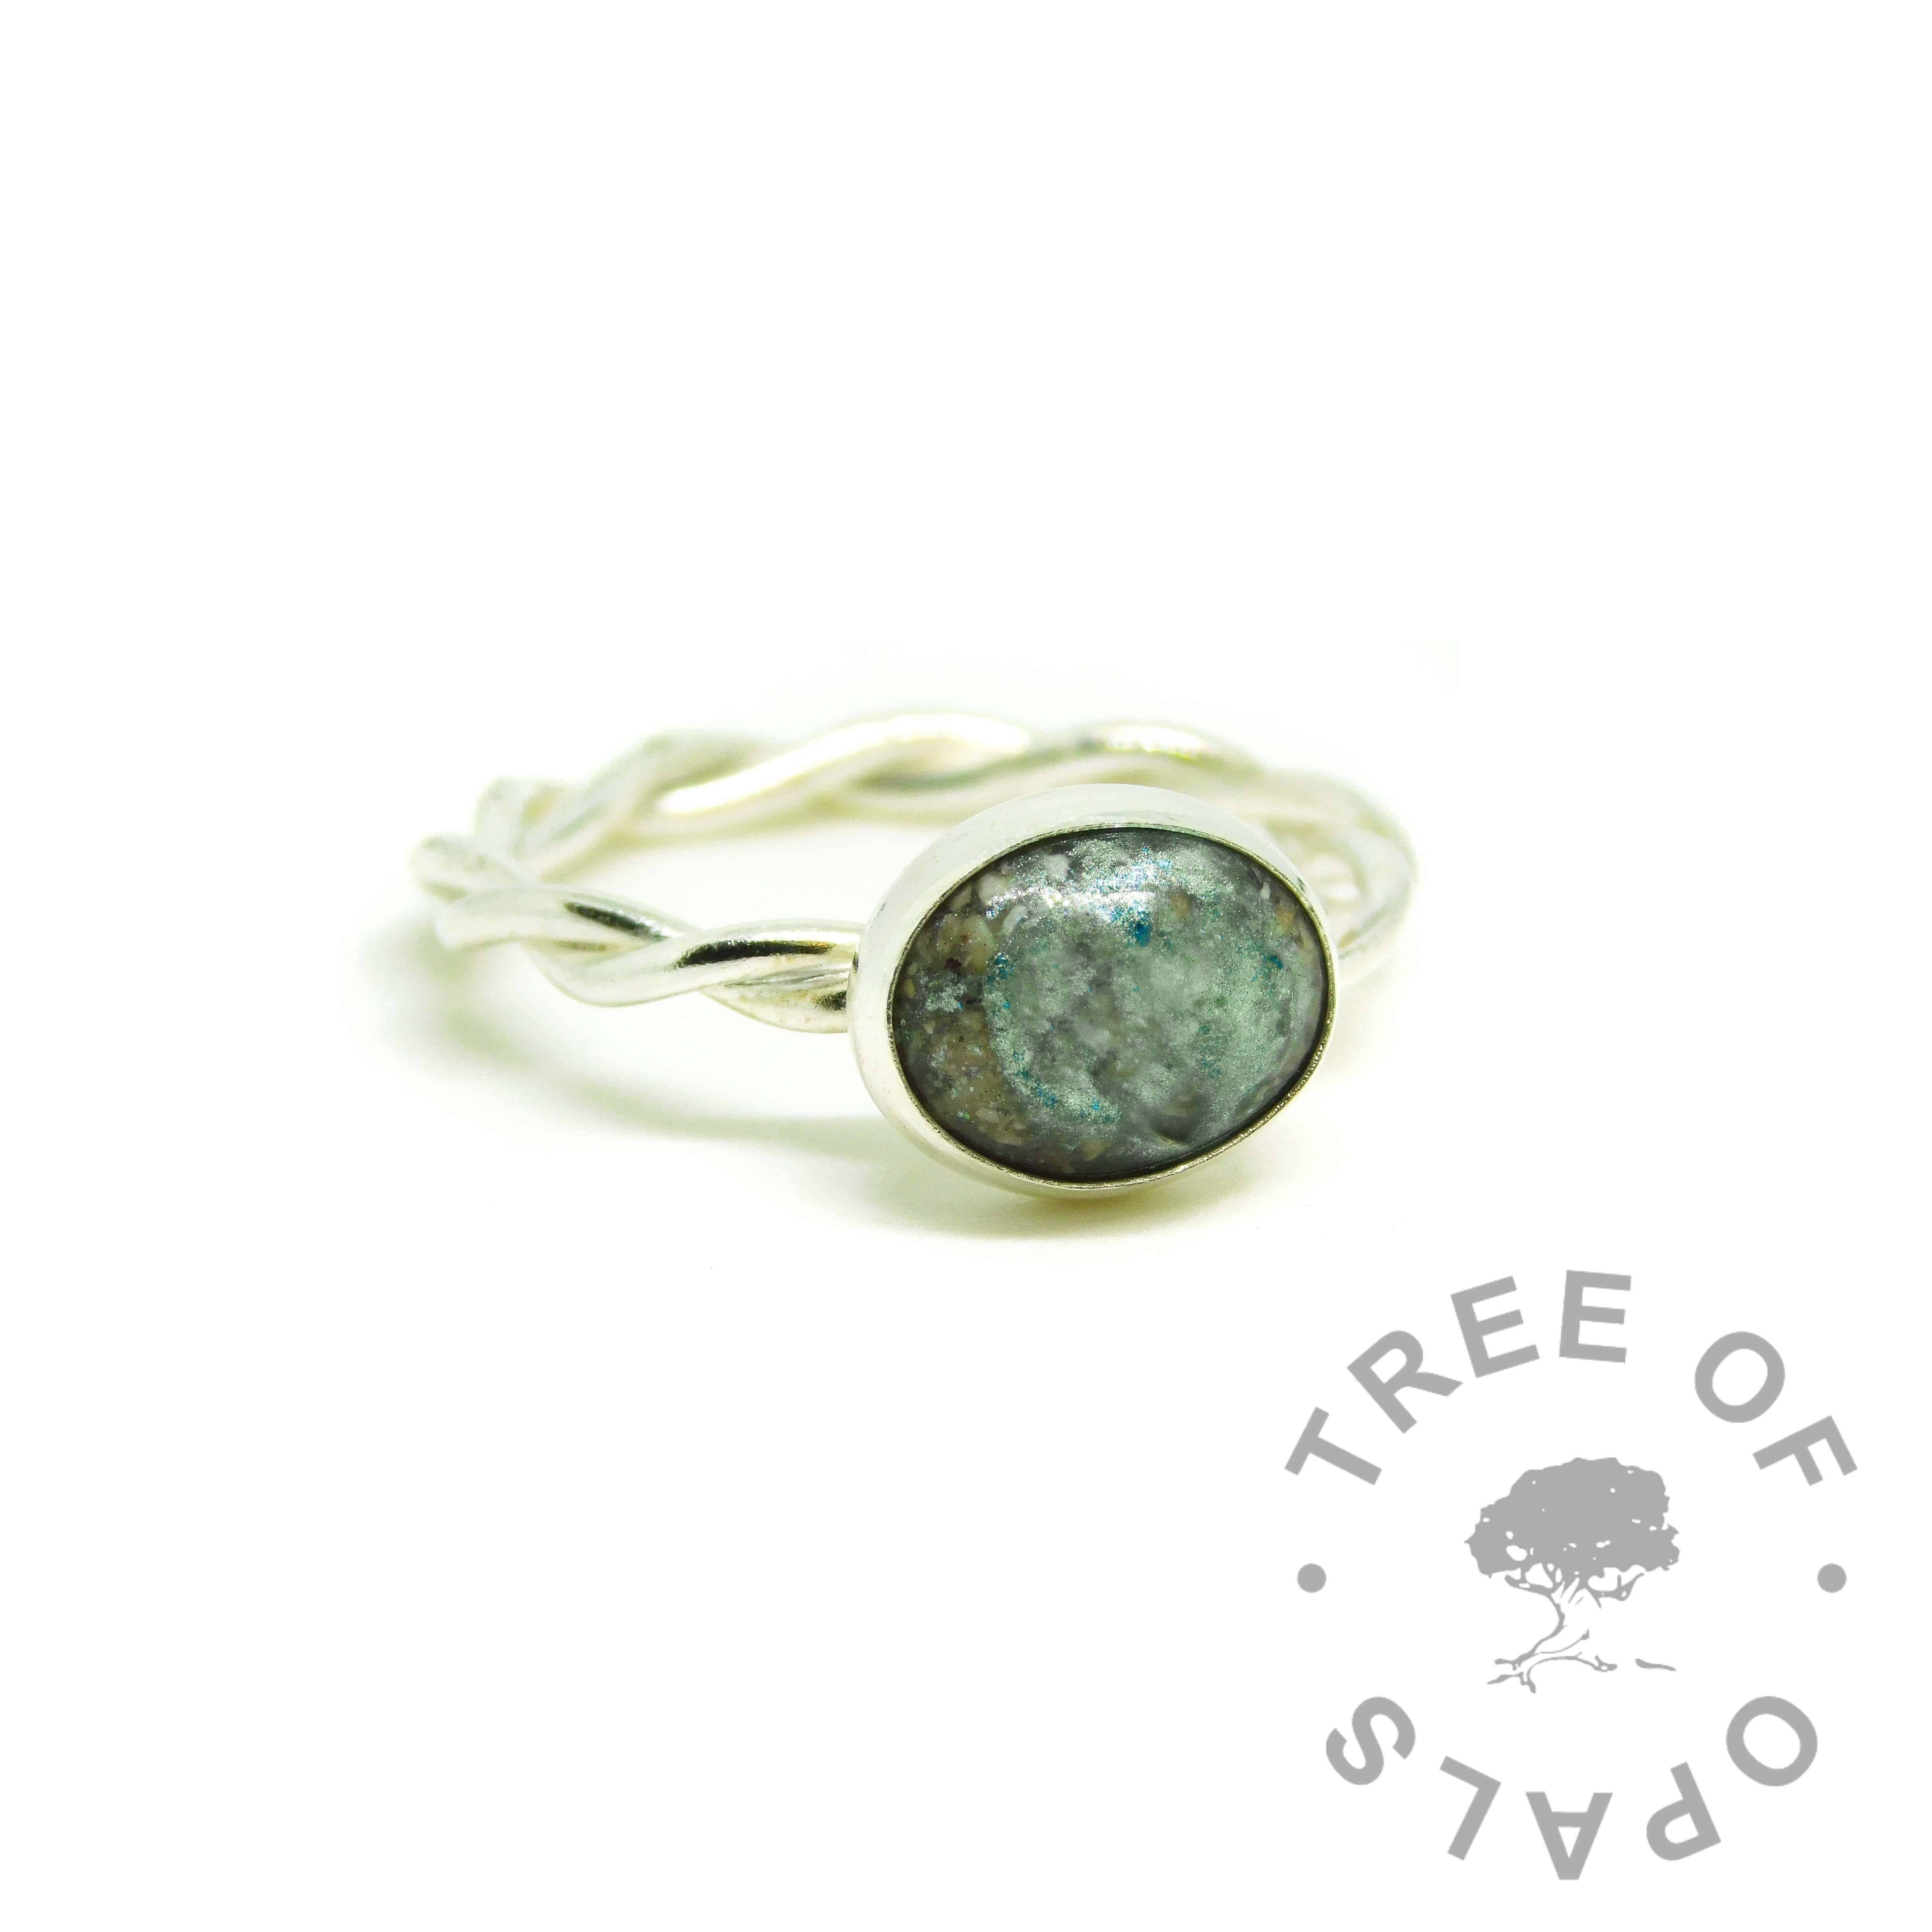 aqua ashes ring, cremation ashes ring on twisted band. Angelic aqua resin sparkle mix